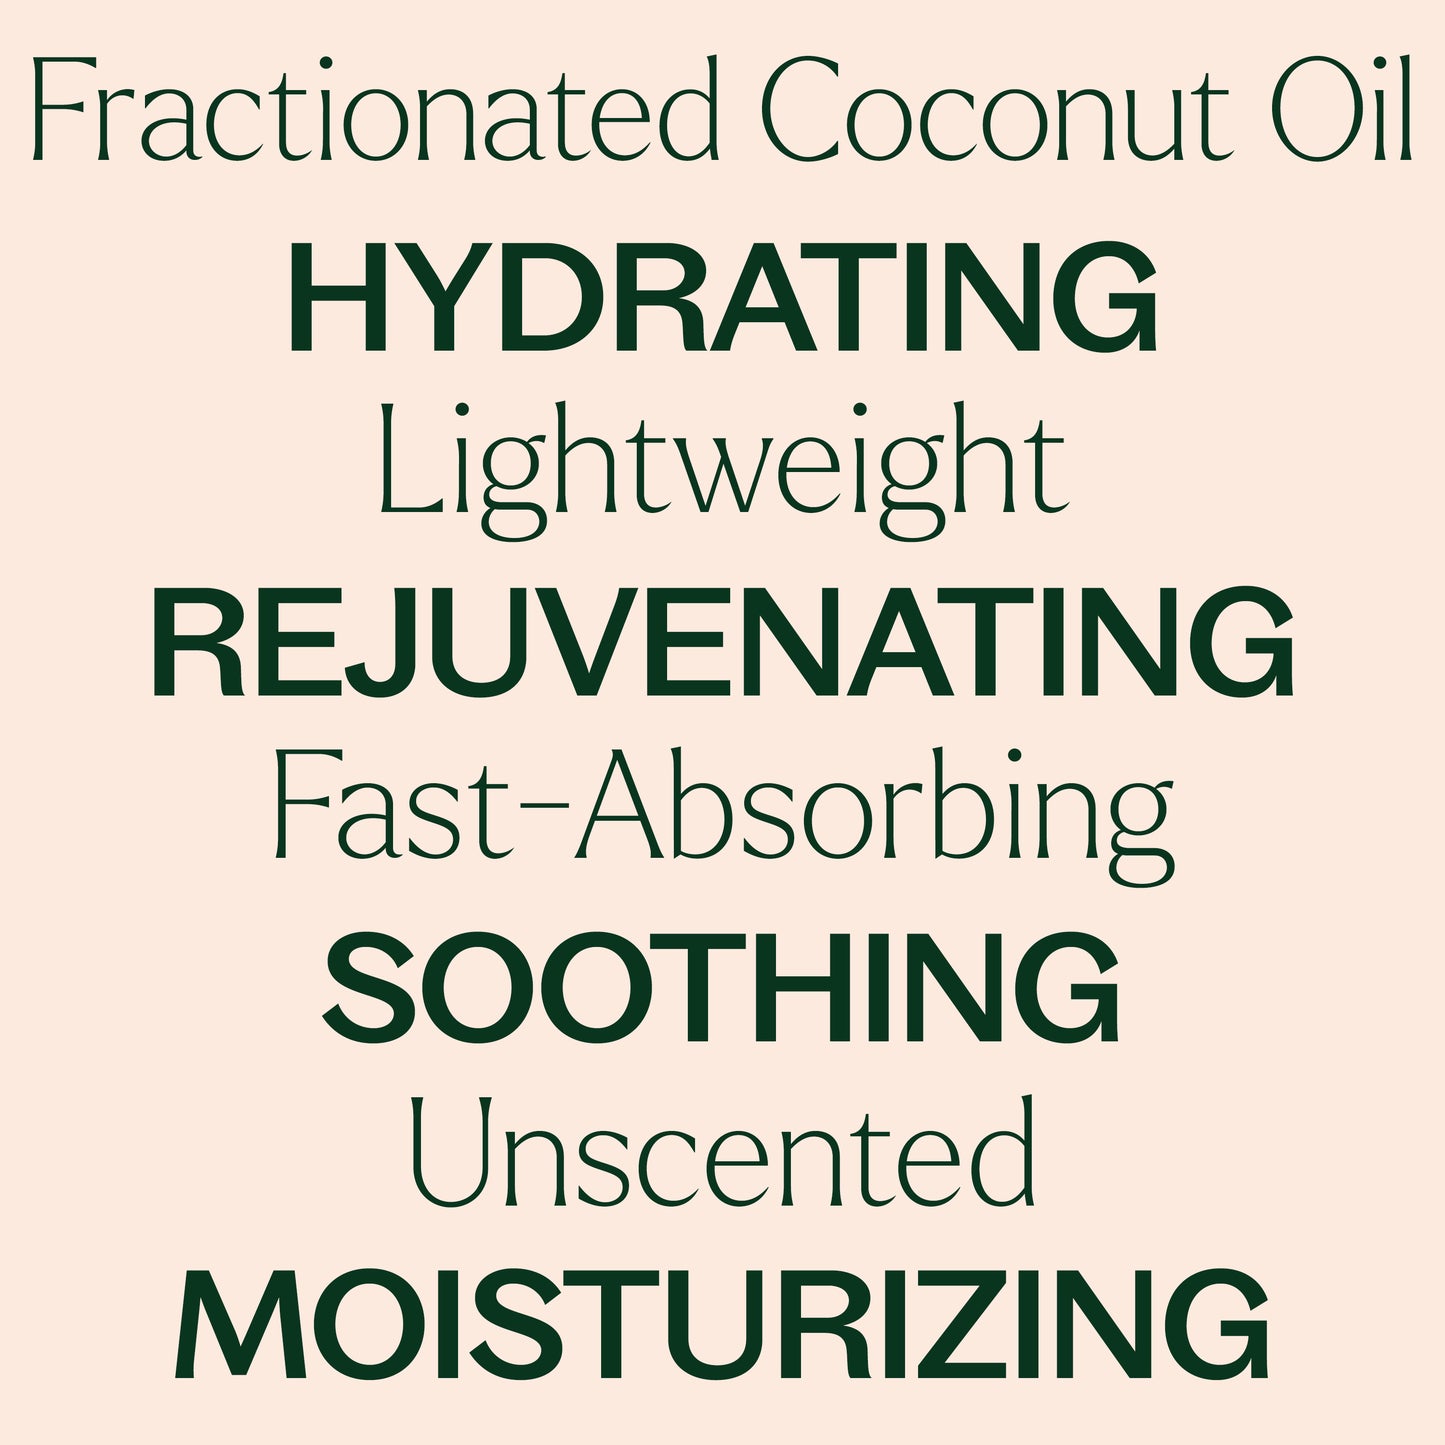 Fractionated Coconut Carrier Oil hydrating, lightweight, rejuvenating, fast-absorbing, soothing, unscented, moisturizing